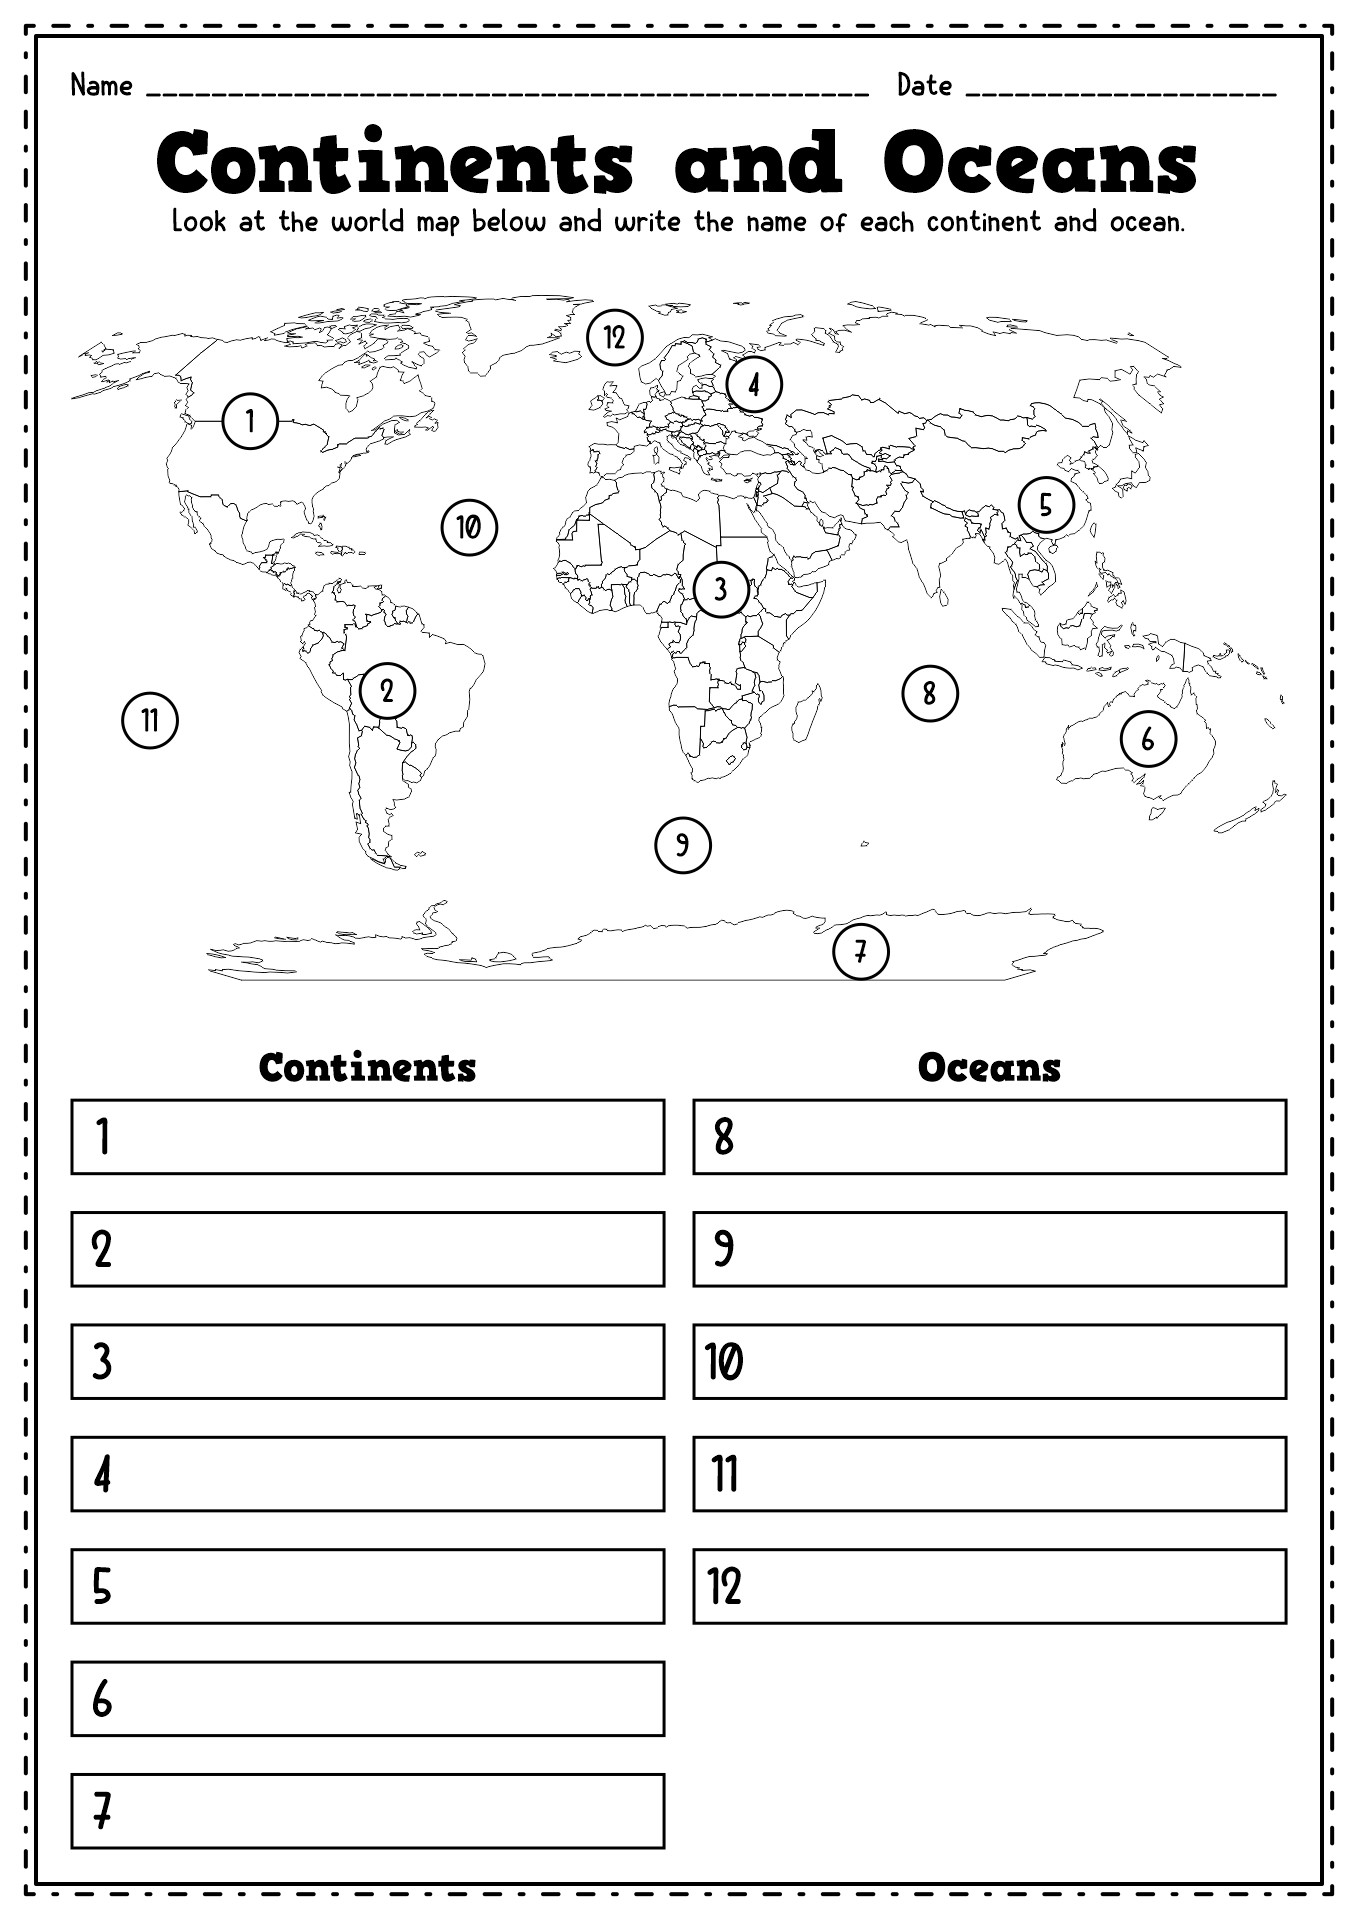 10 Best Images of Blank Continents And Oceans Worksheets - Printable ...